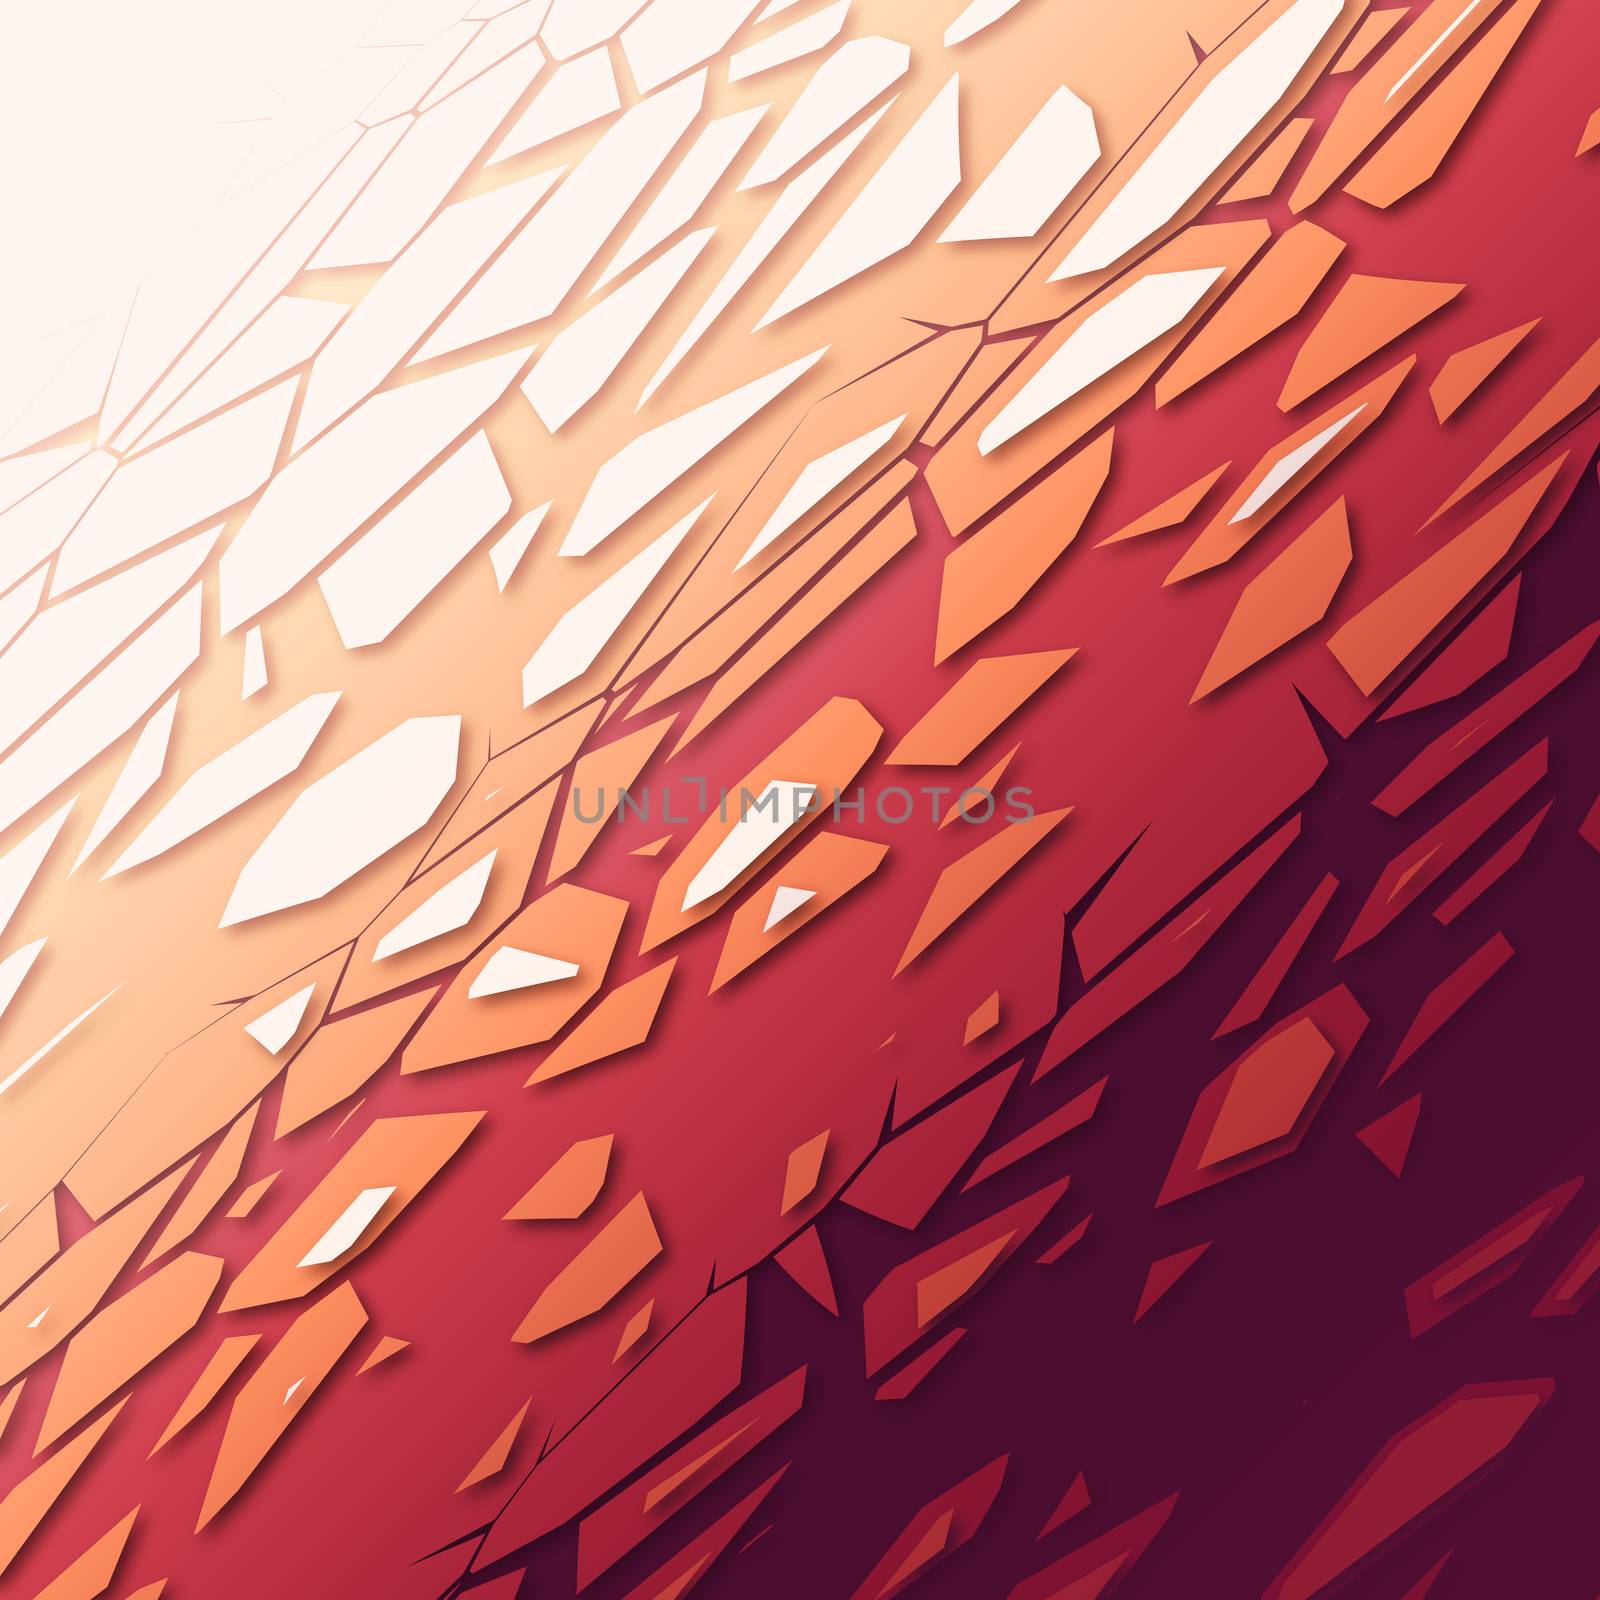 An illustration of an abstract red white tiles background